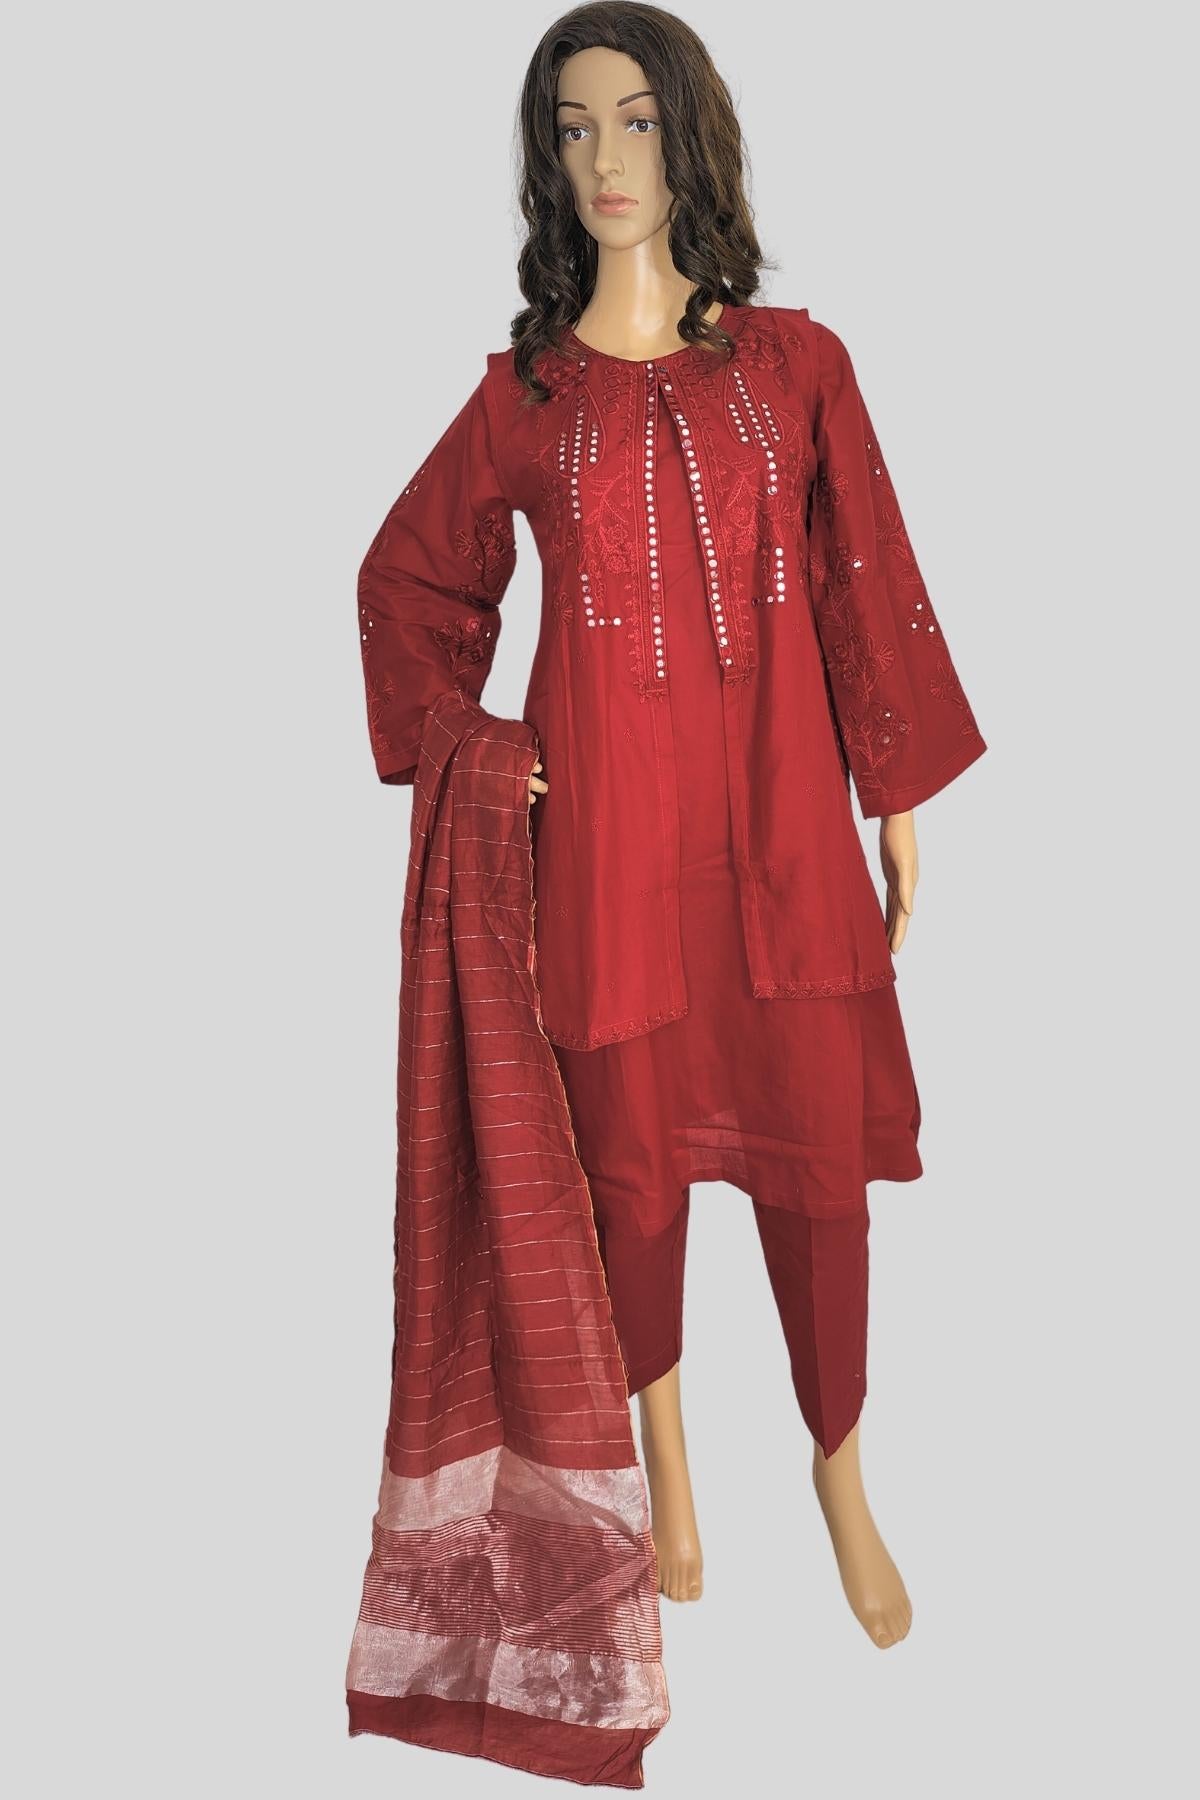 3 Piece Embroidered Cotton/Lawn suit